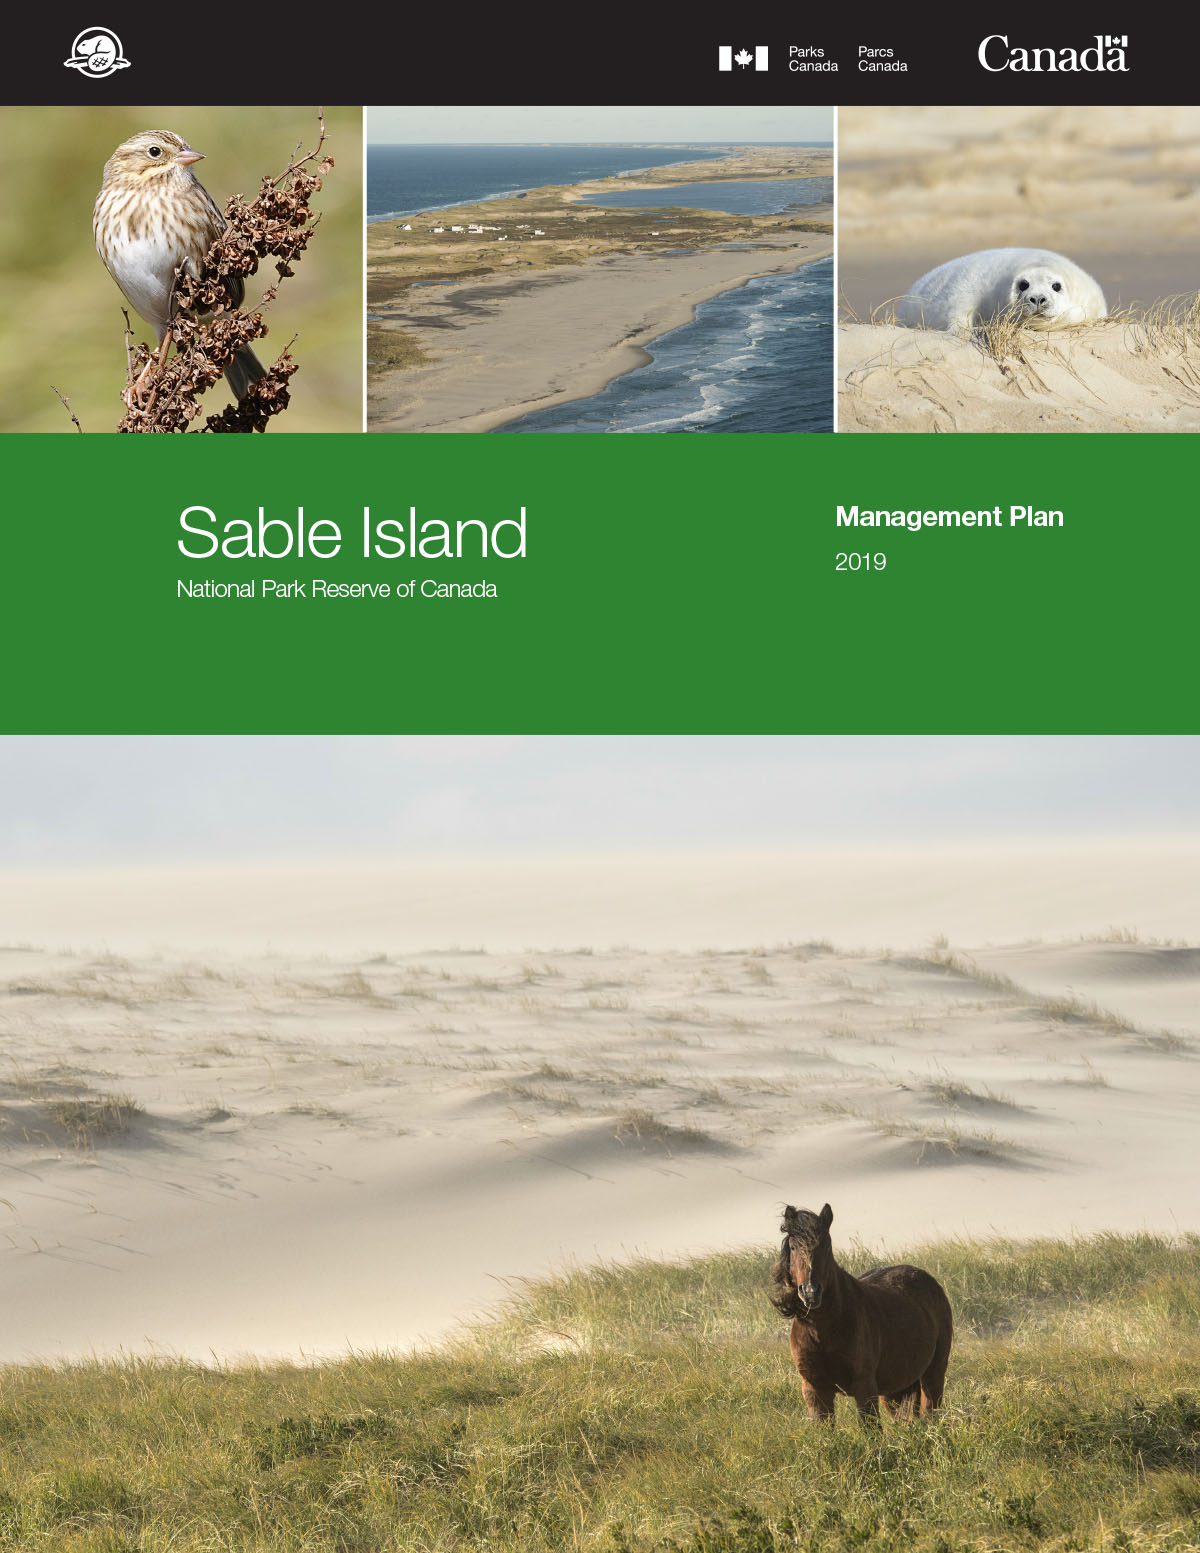 Five images: A small bird. A narrow beach. A white seal. A wild horse. A green rectangle with white text that reads Sable Island National Park Reserve of Canada Management Plan 2019.